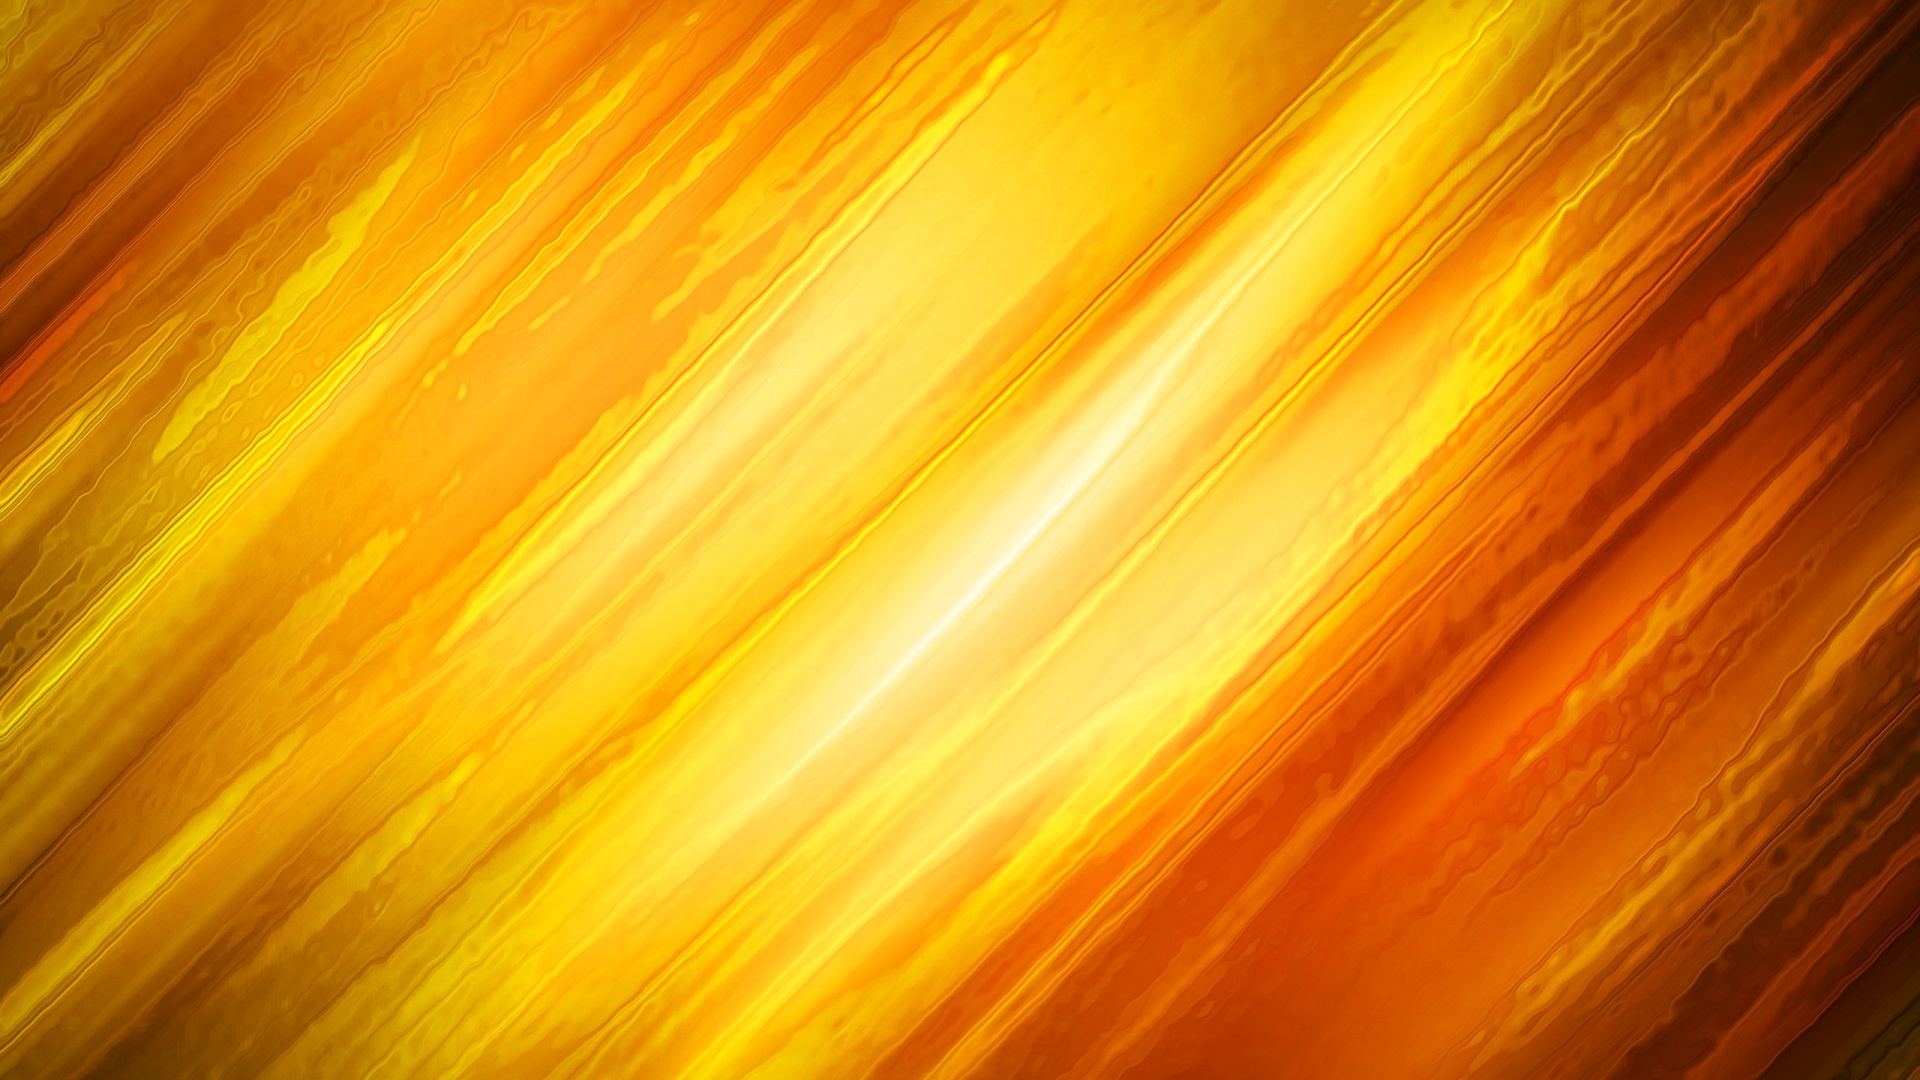 Wallpaper Background Orange Yellow Abstract